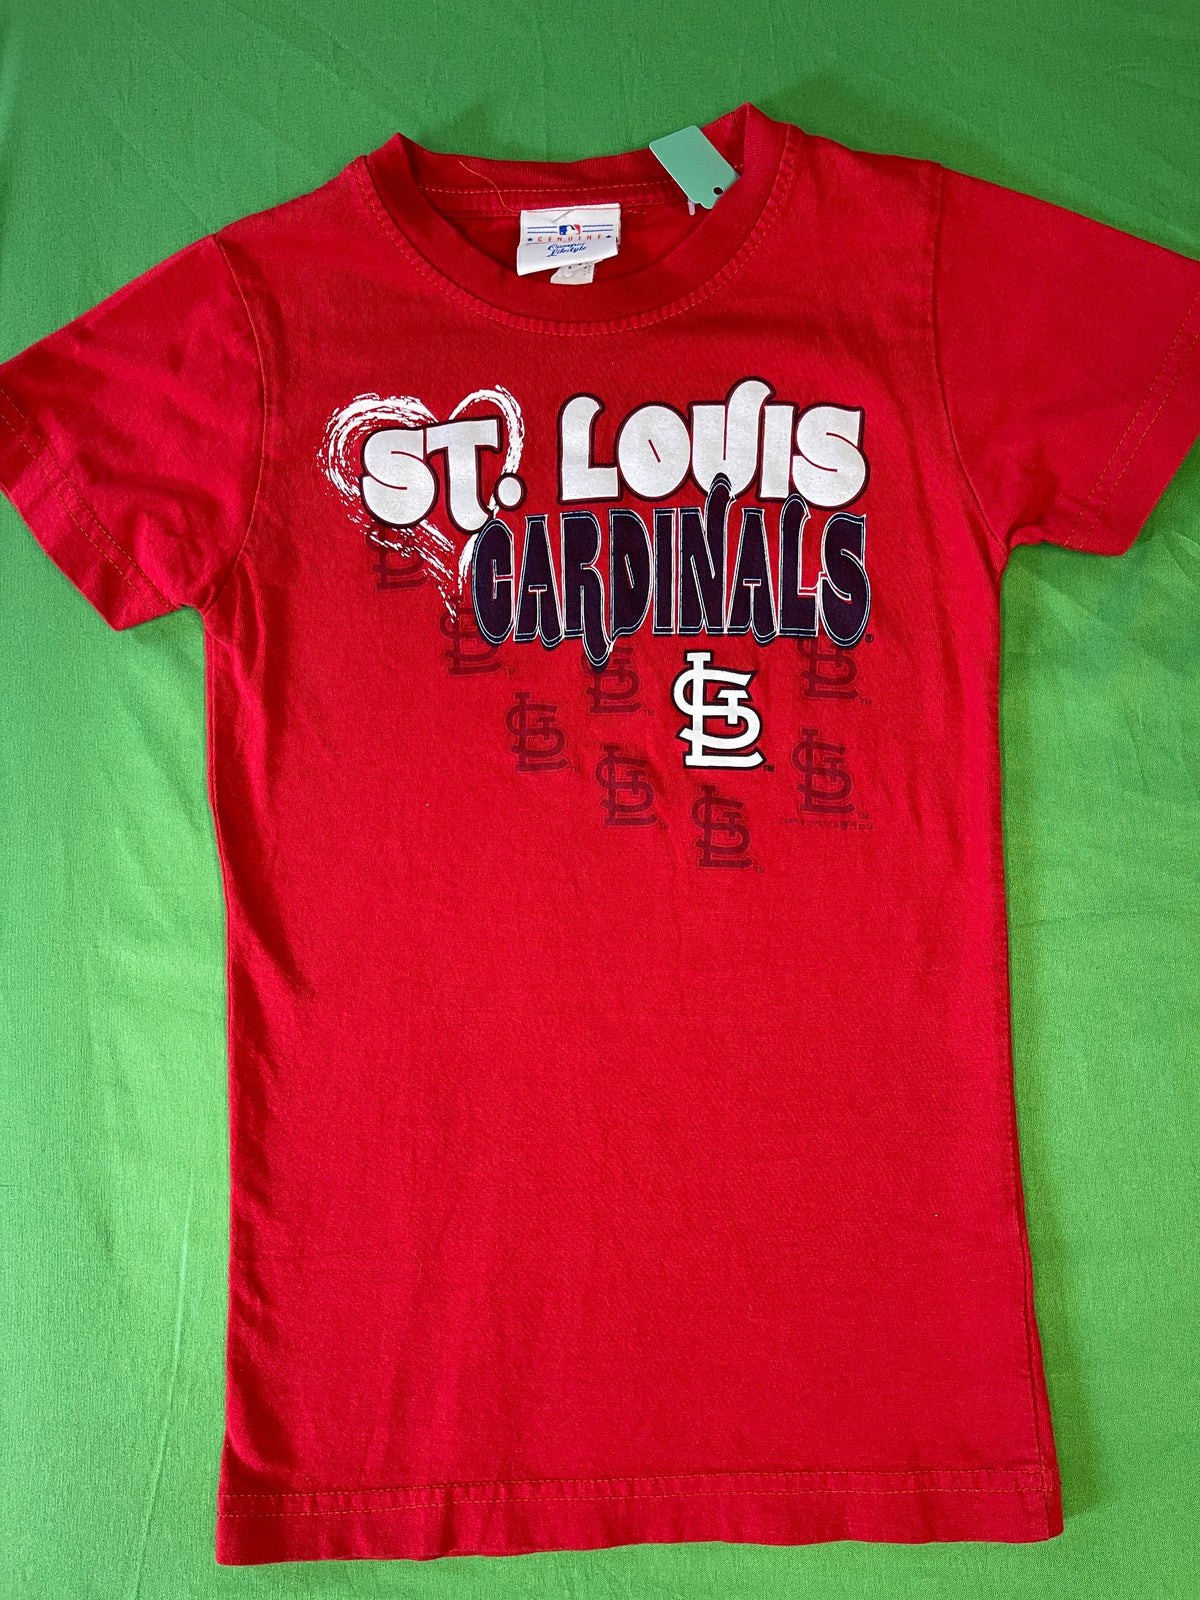 MLB St. Louis Cardinals Sparkly Girls' T-Shirt/Dress Youth X-Small